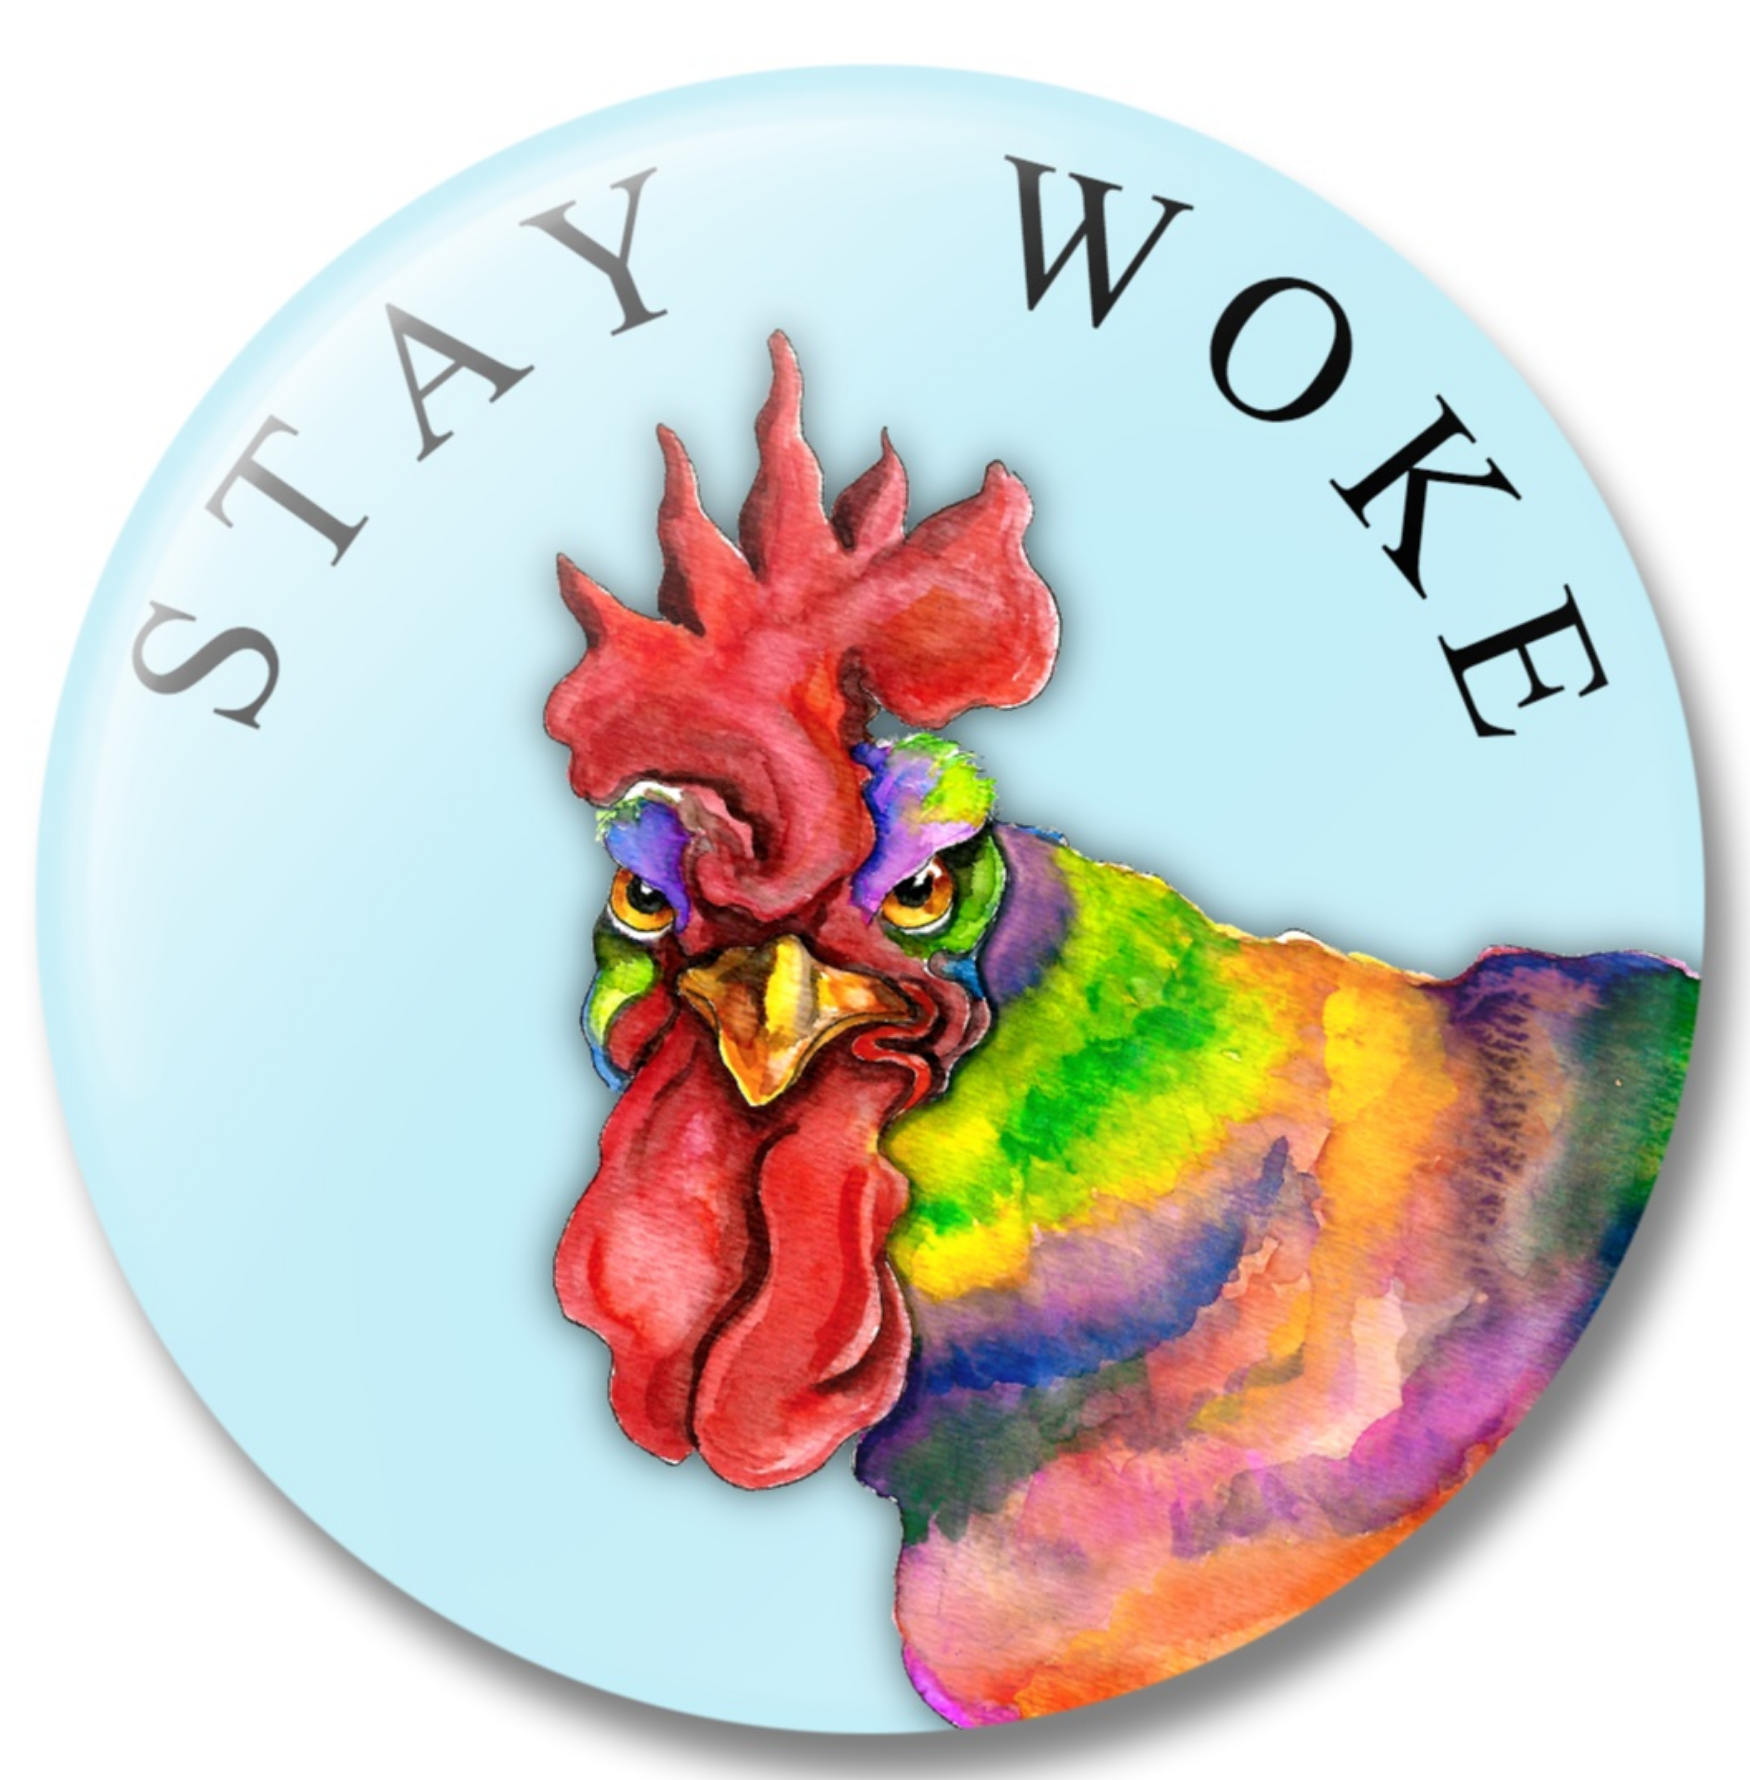 Anti Trump Magnet Stay Woke Rooster Button Funny Protest